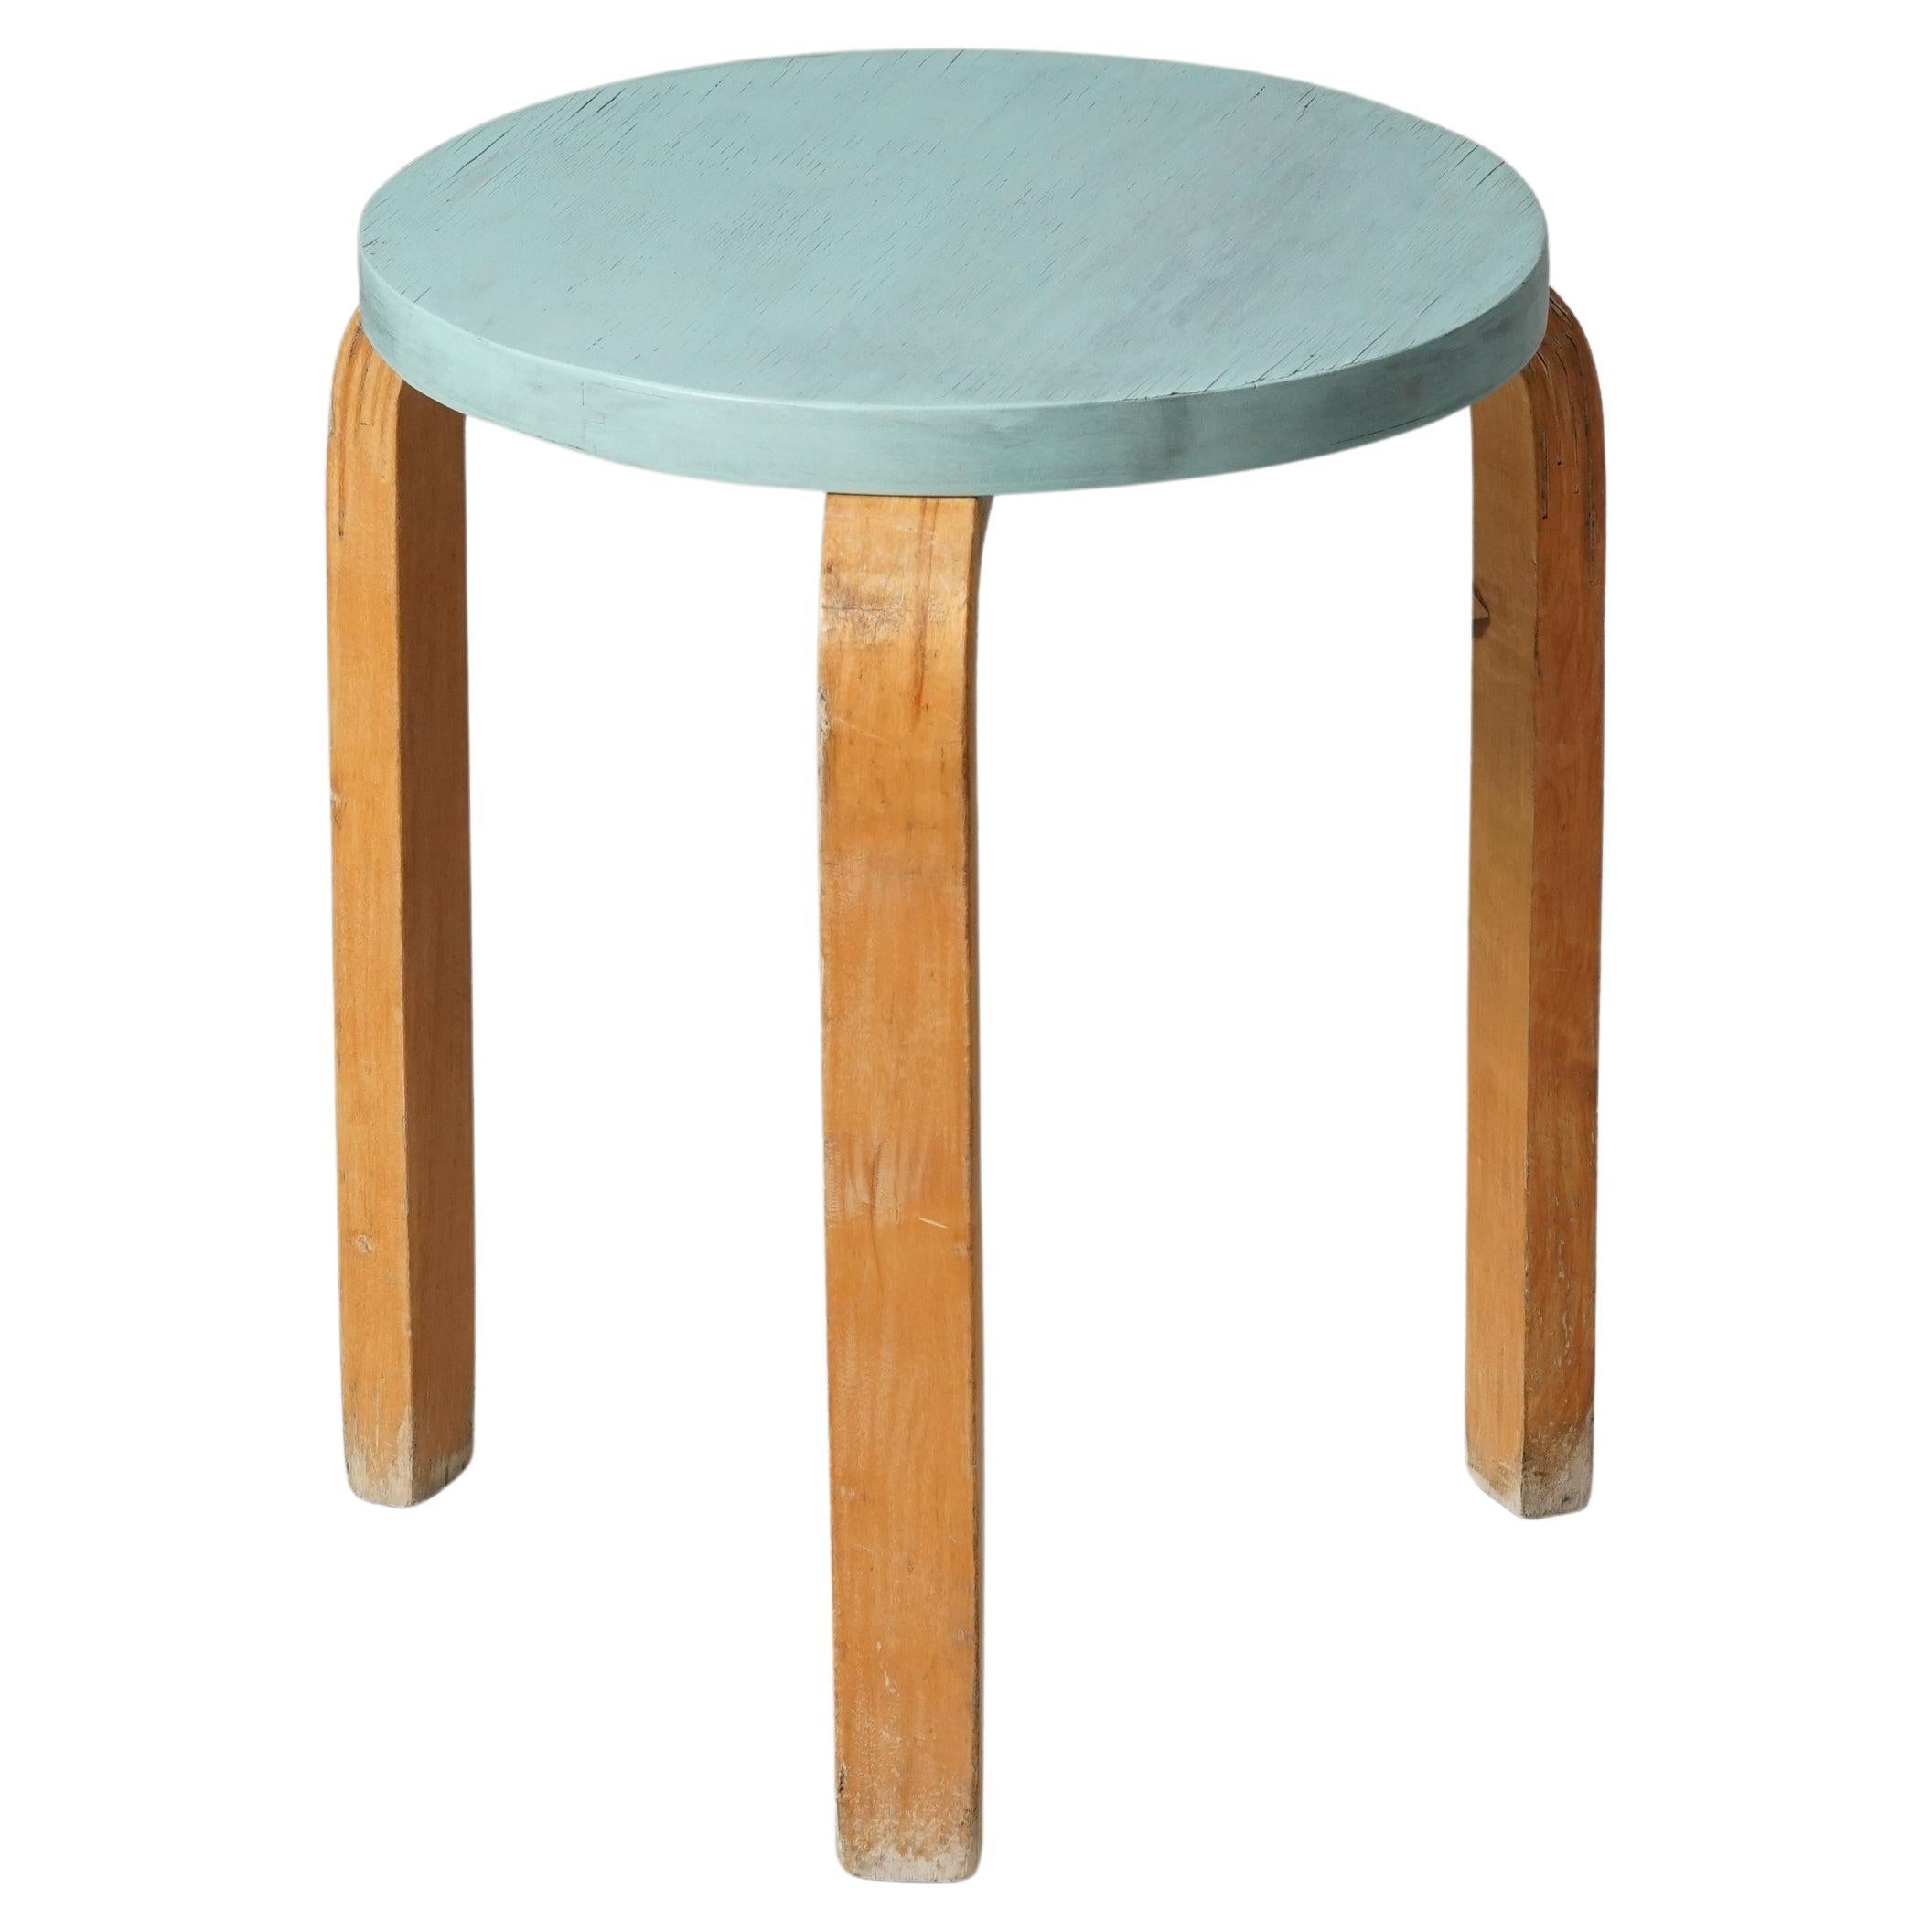 Rare color stool model 60, designed by Alvar Aalto, manufactured by Oy Huonekalu- ja Rakennustyötehdas Ab, 1940s. Birch with painted top. Good vintage condition, patina consistent with age and use. 

Alvar Aalto (1898-1976) is probably the most